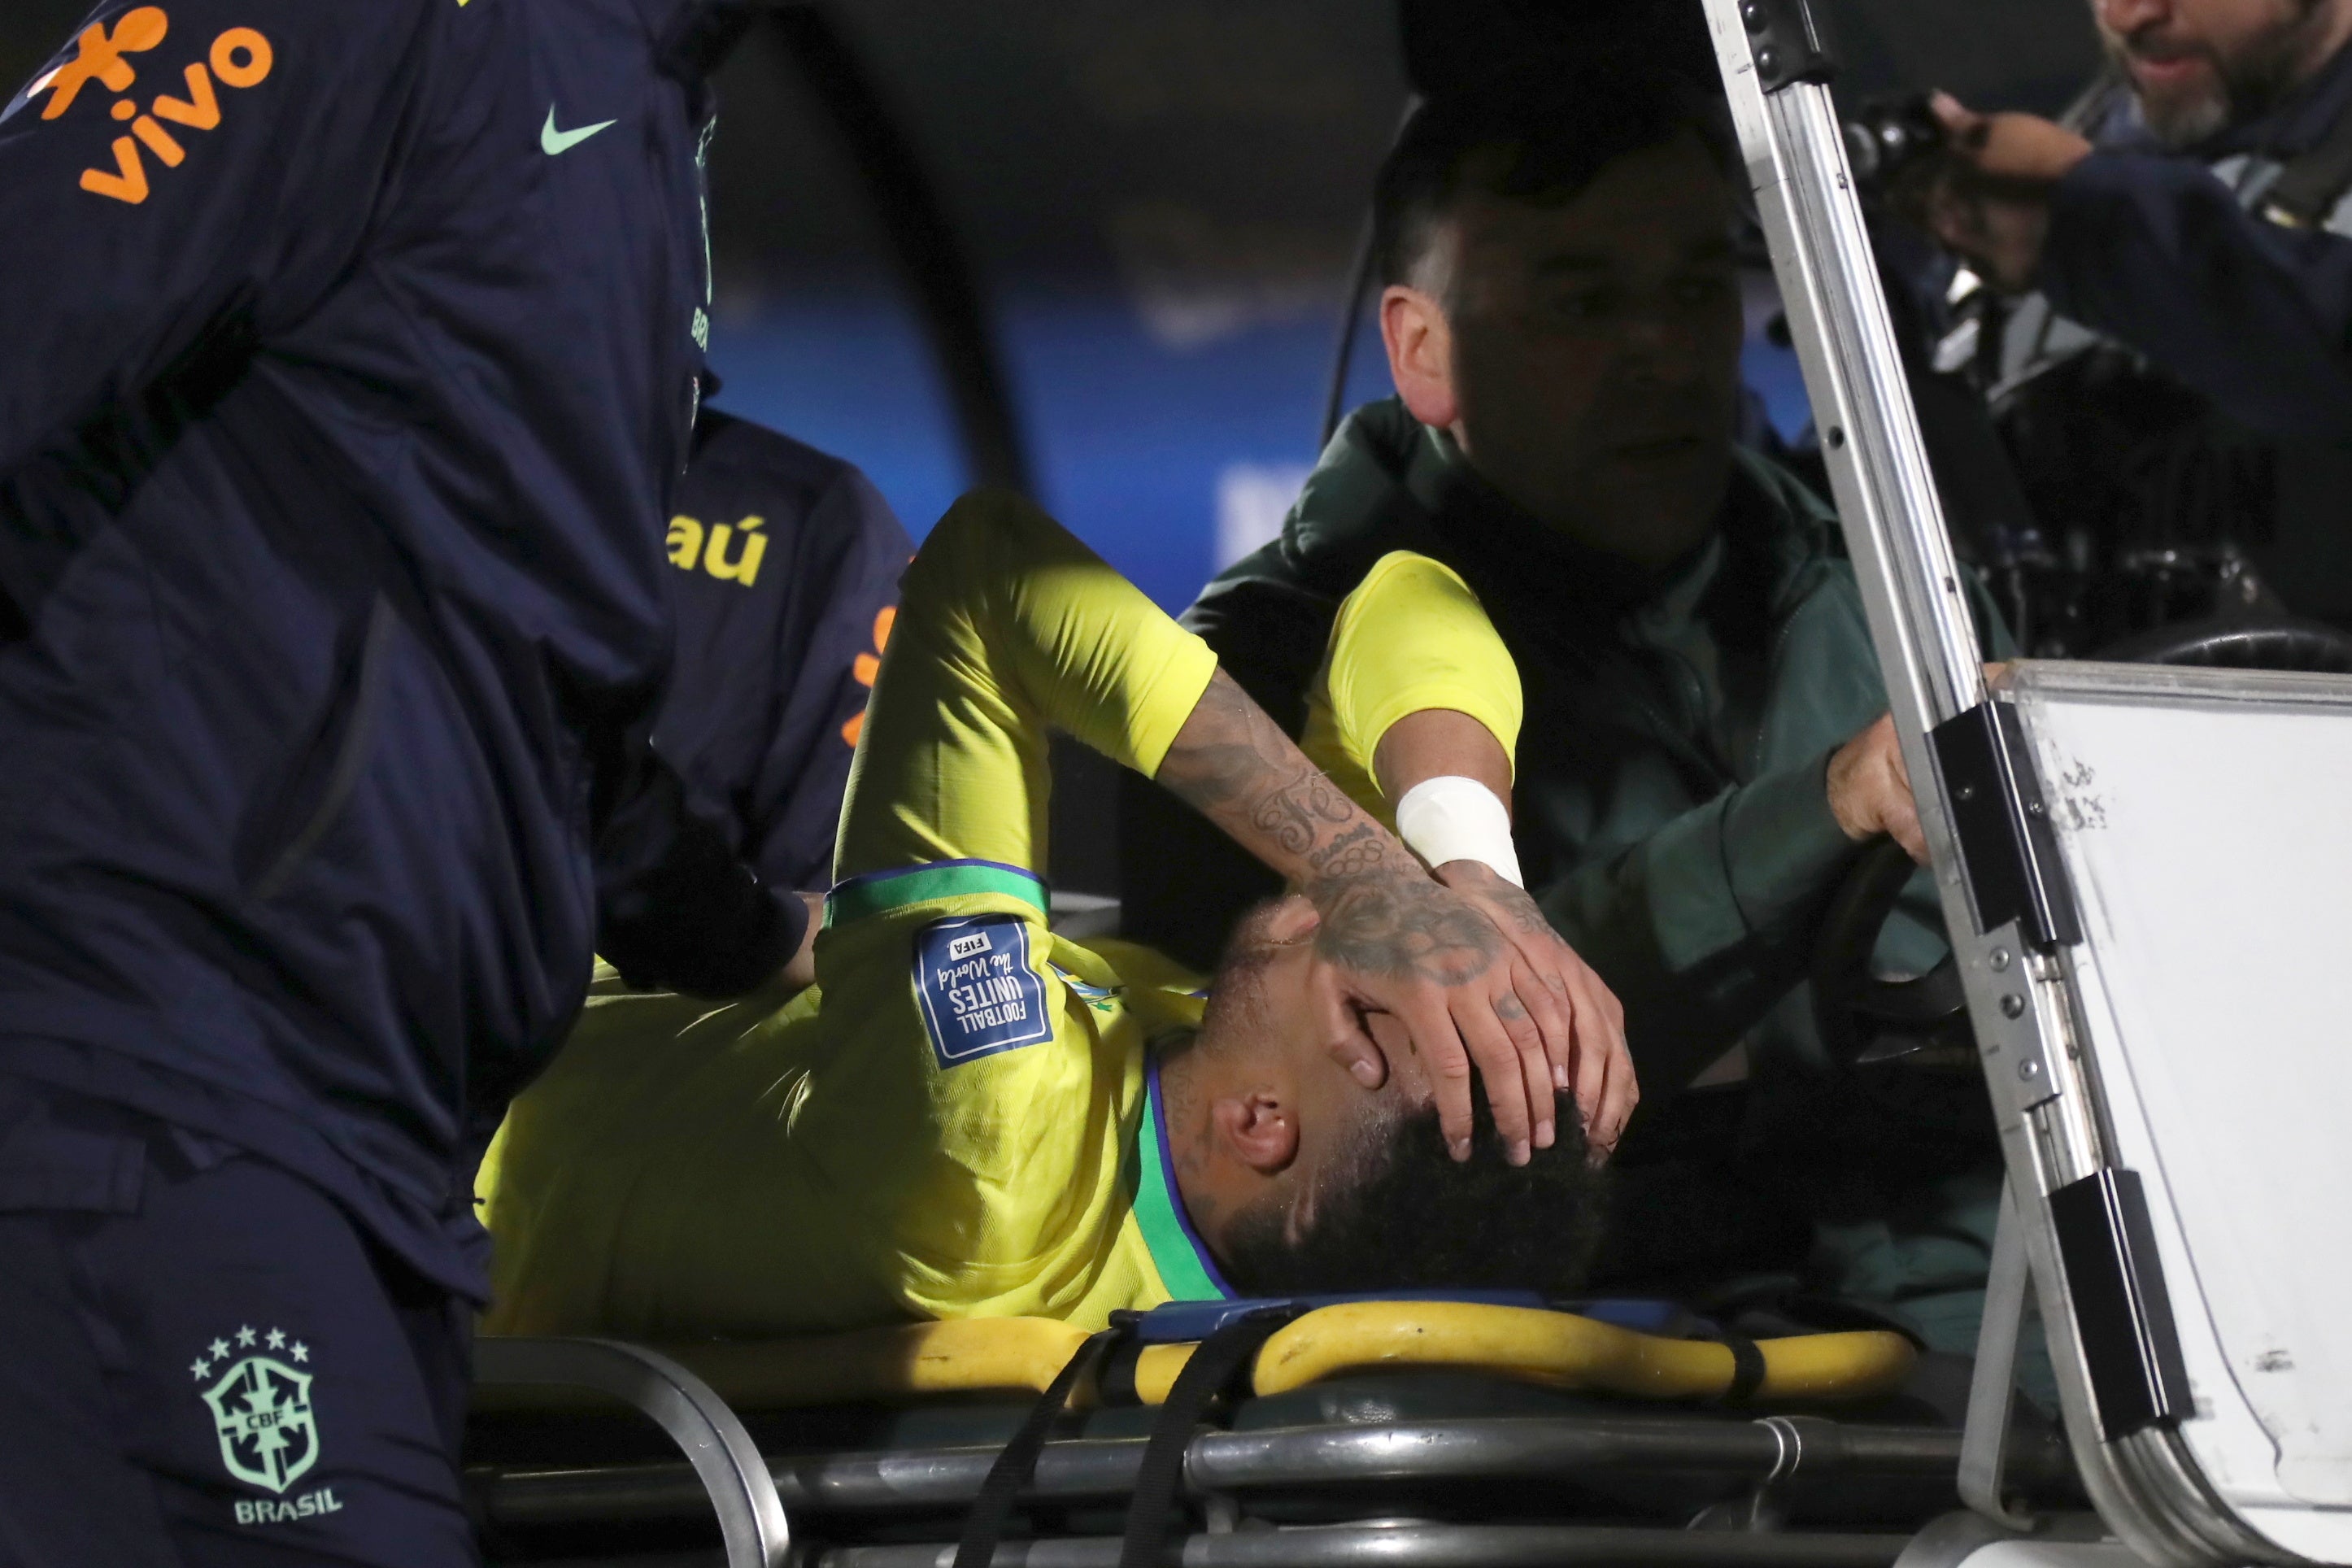 Brazil issue Neymar recovery update after ACL surgery as Ederson